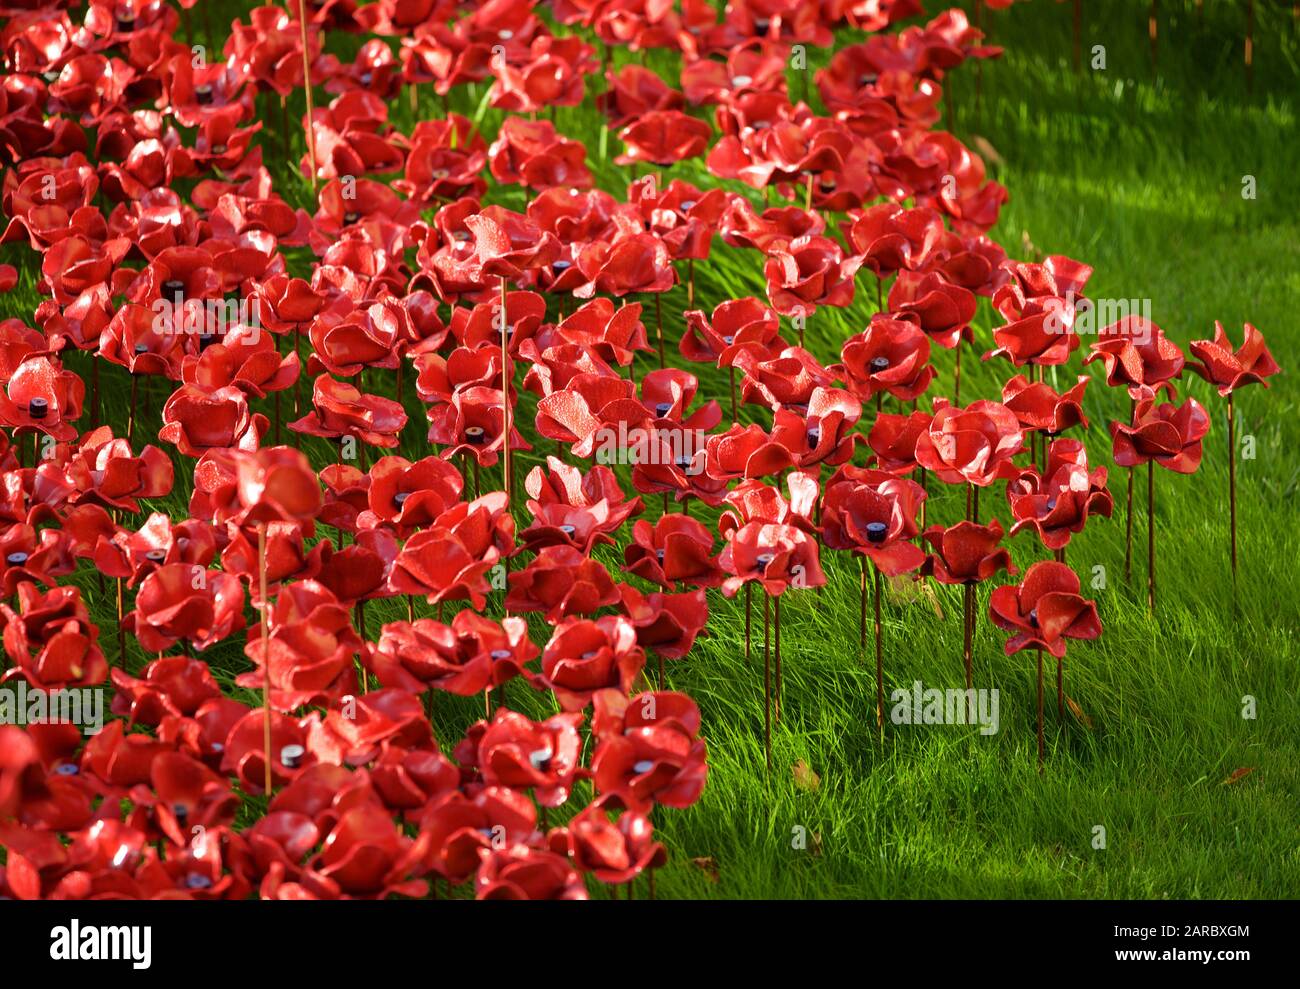 Poppies from Blood Swept Lands and Seas of Red installation at The Tower of London marking 100 years since the 1st World War. Stock Photo